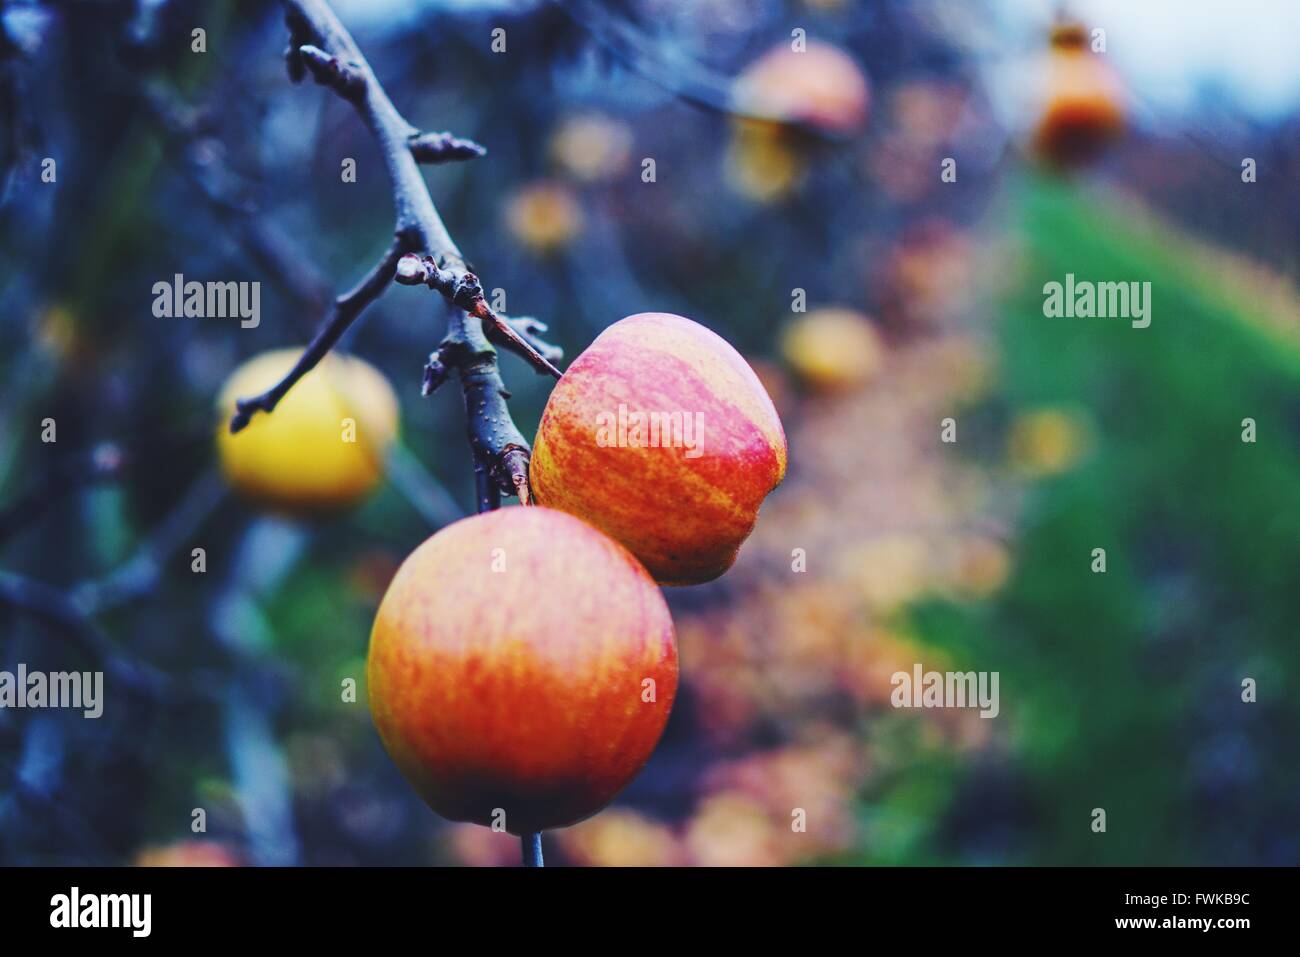 Close-Up Of Apples Growing On Tree Stock Photo